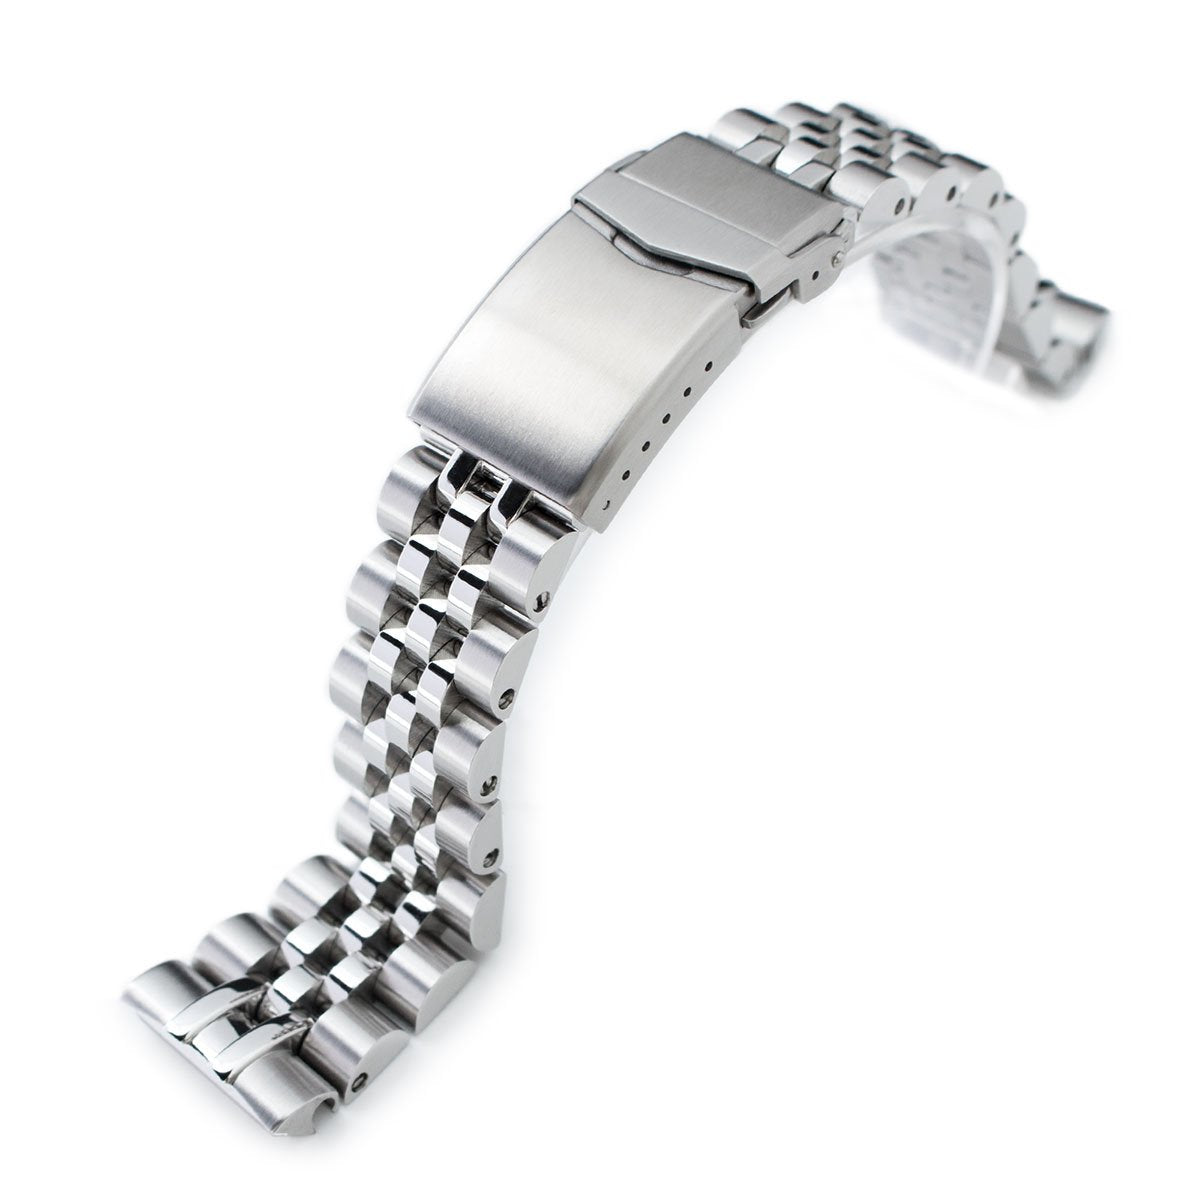 22mm oyster Solid Link stainless steel bracelet For seiko prospex king  turtle